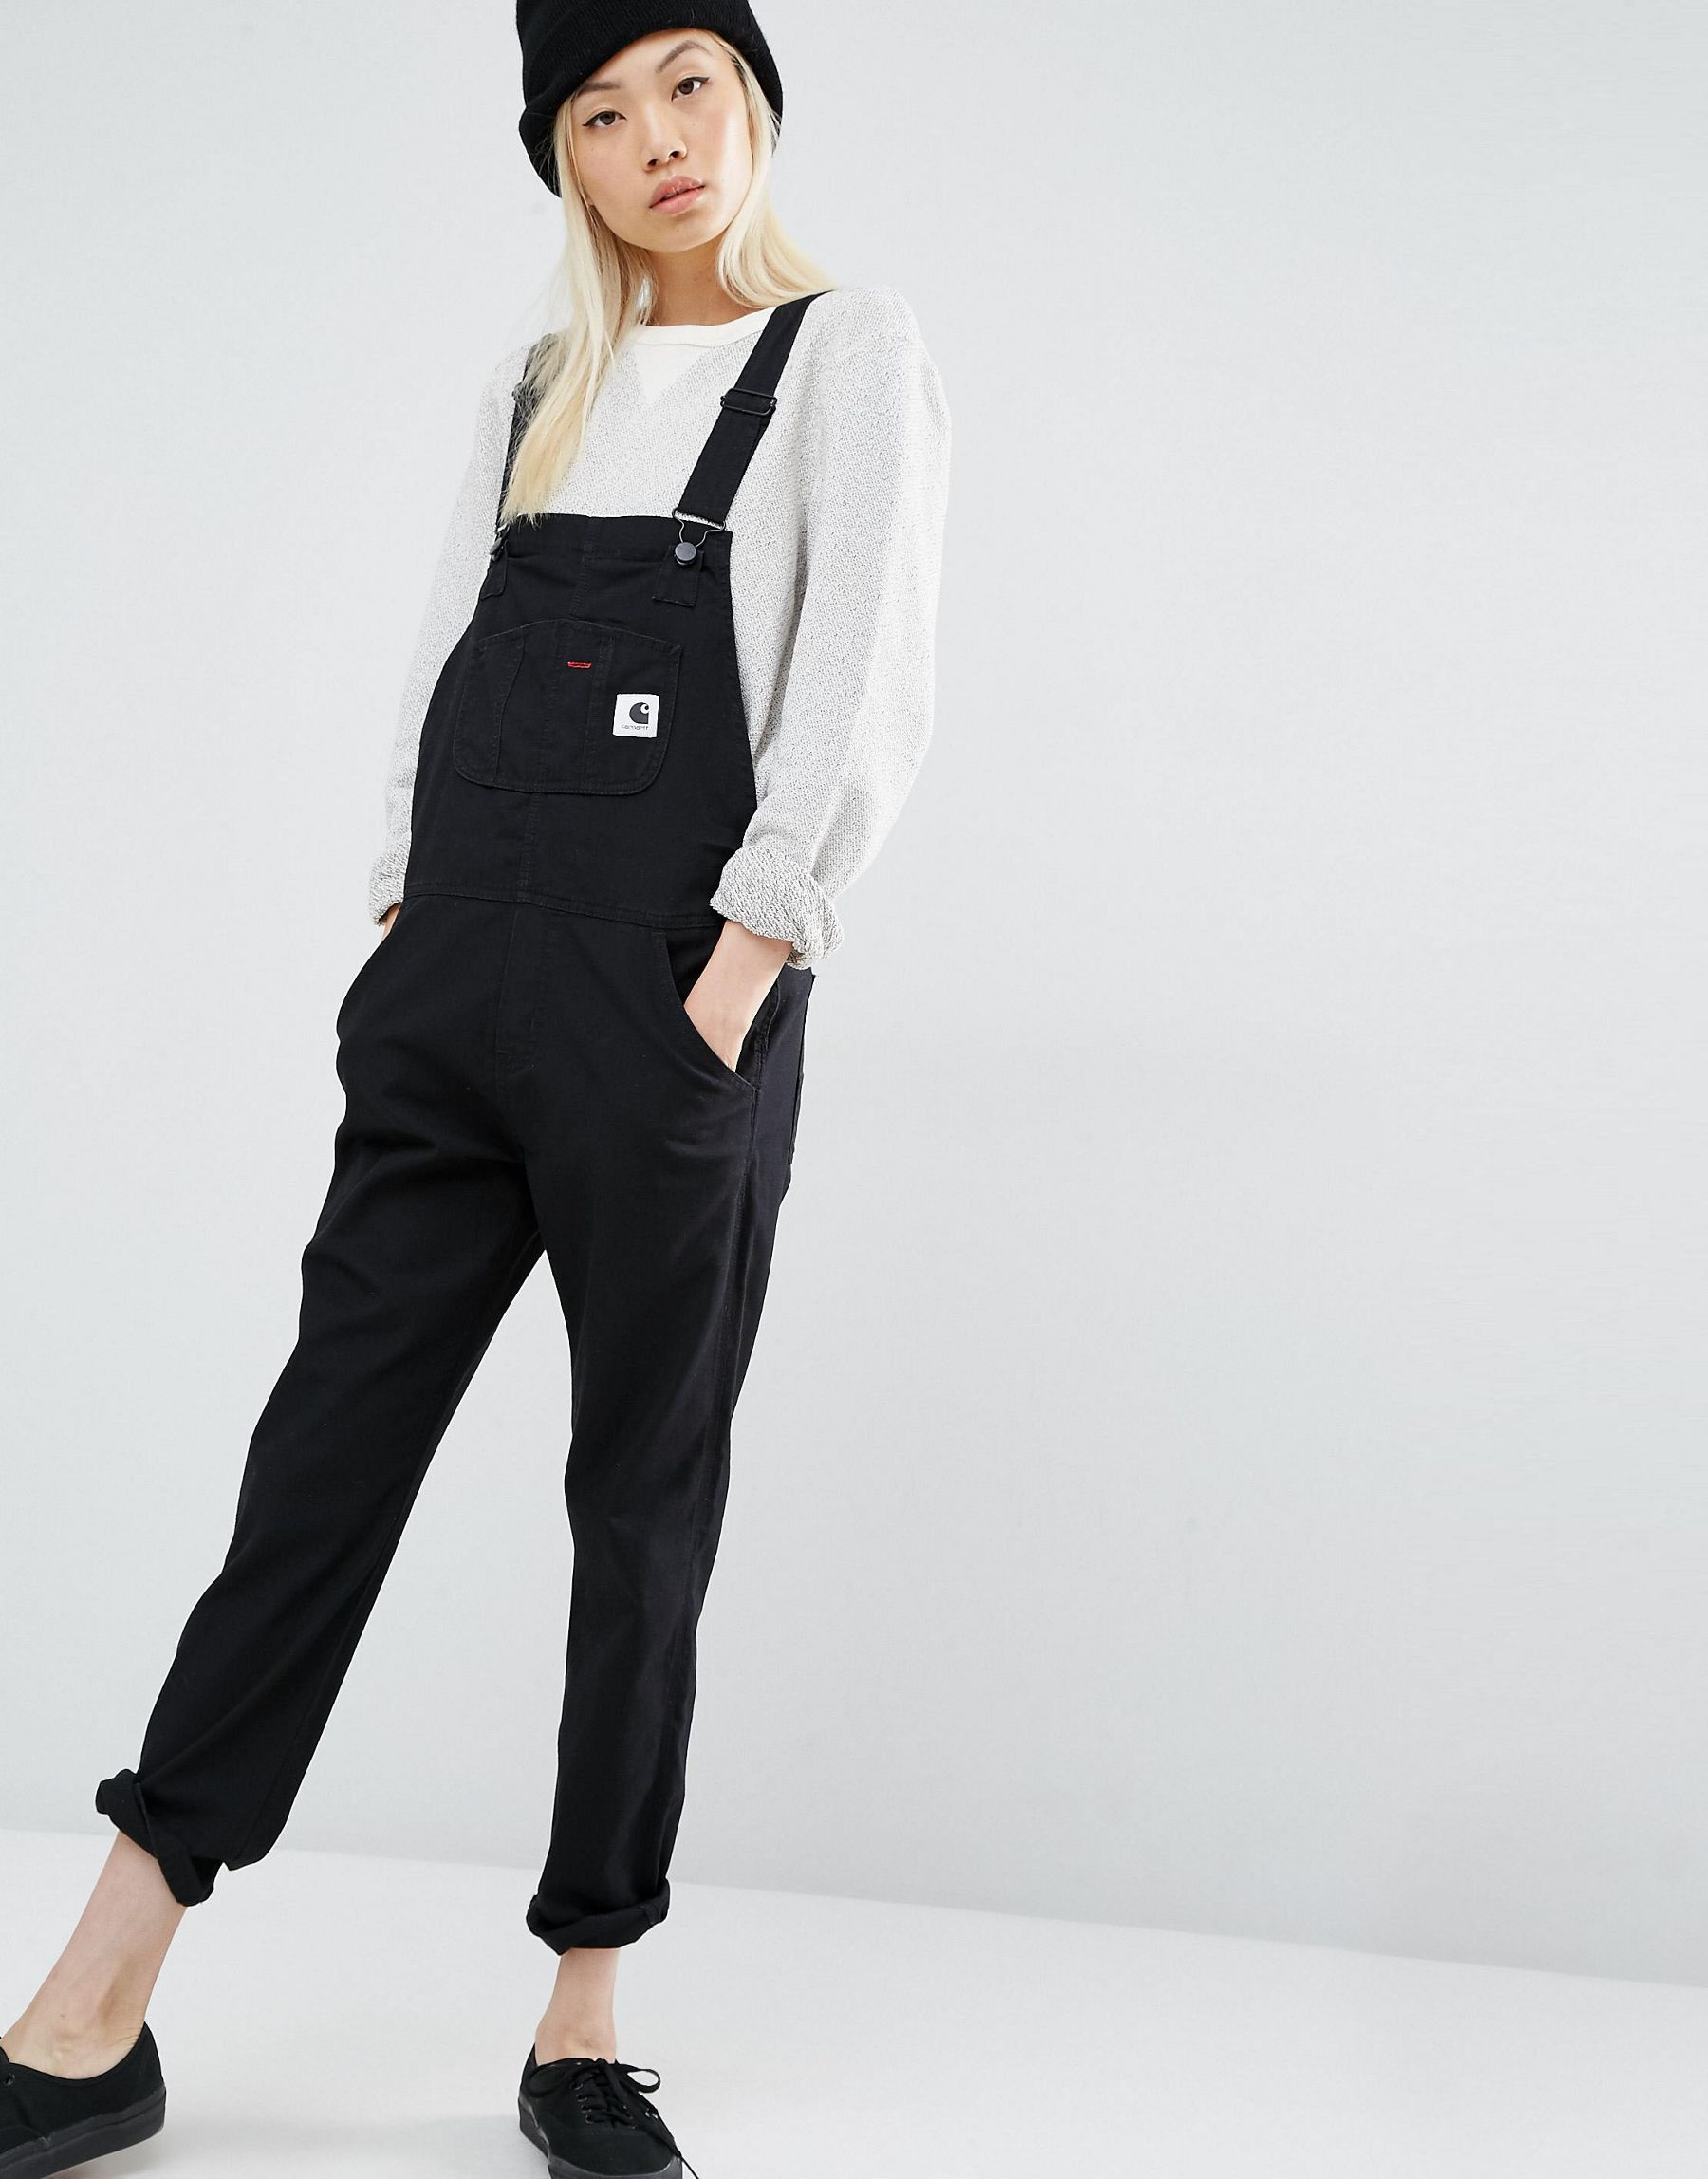 Carhartt WIP Bib Overall Dungarees With Front Logo in Black | Lyst